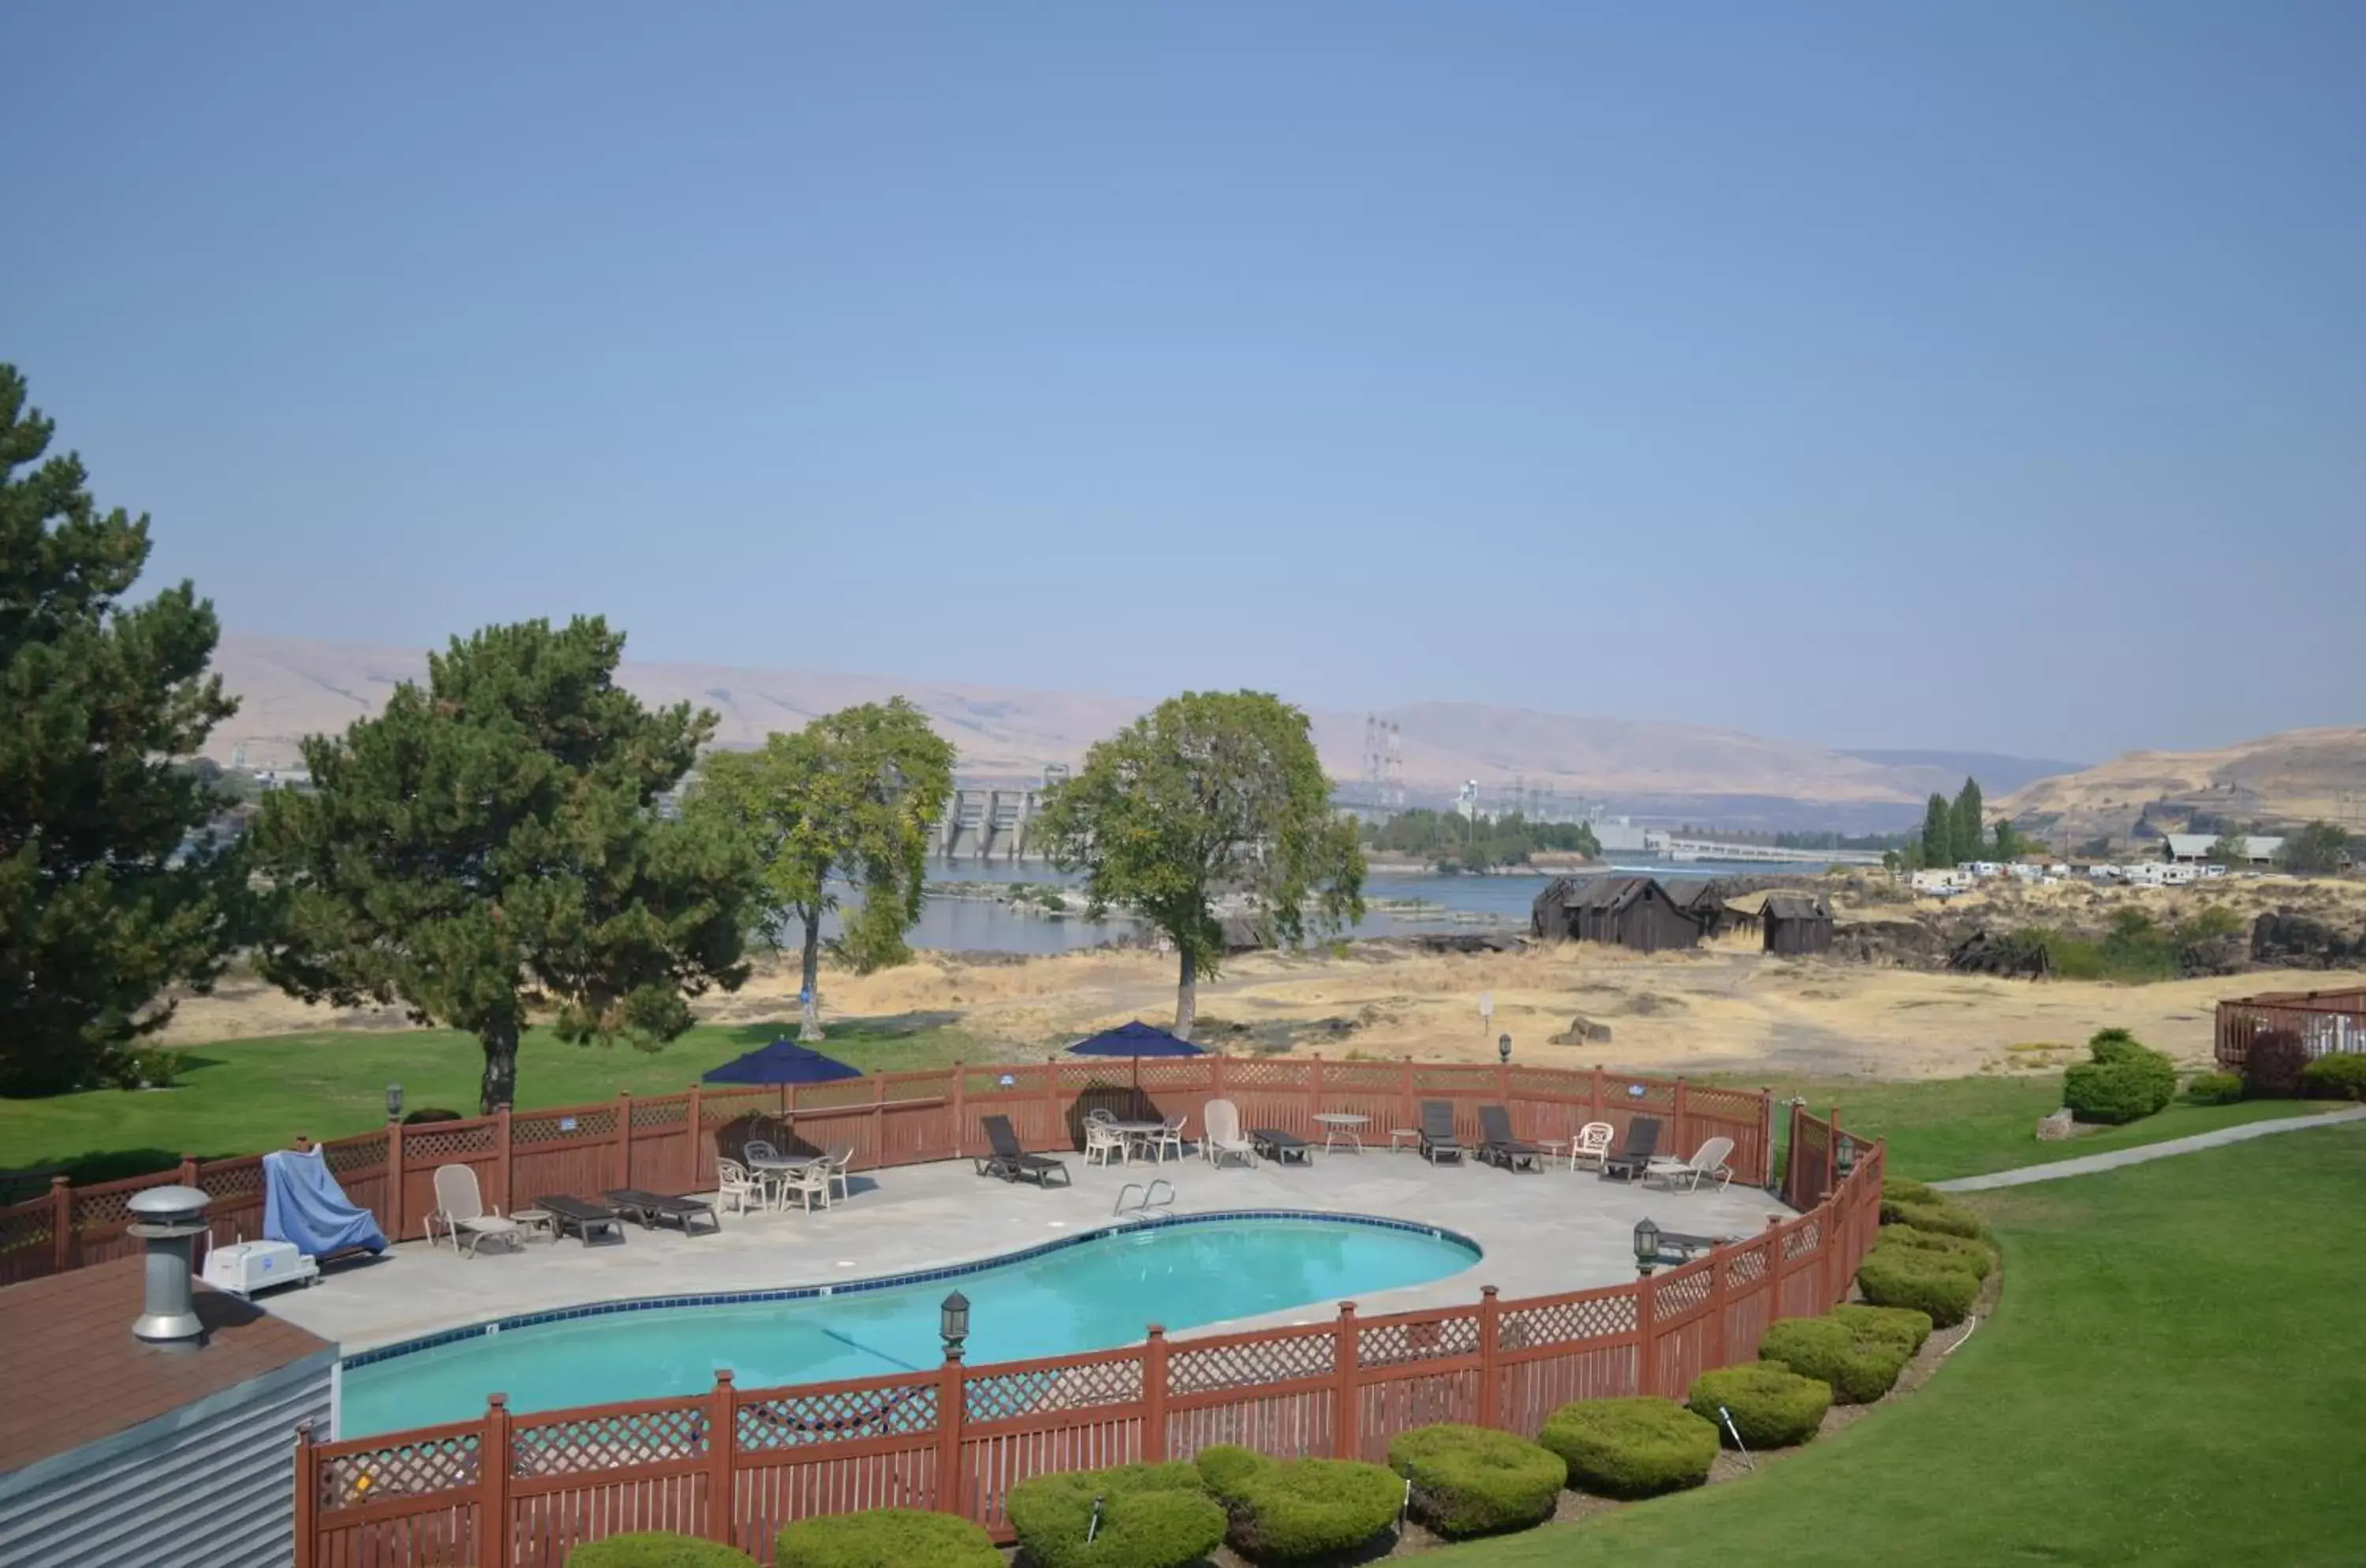 Balcony/Terrace, Pool View in Shilo Inns Suites The Dalles